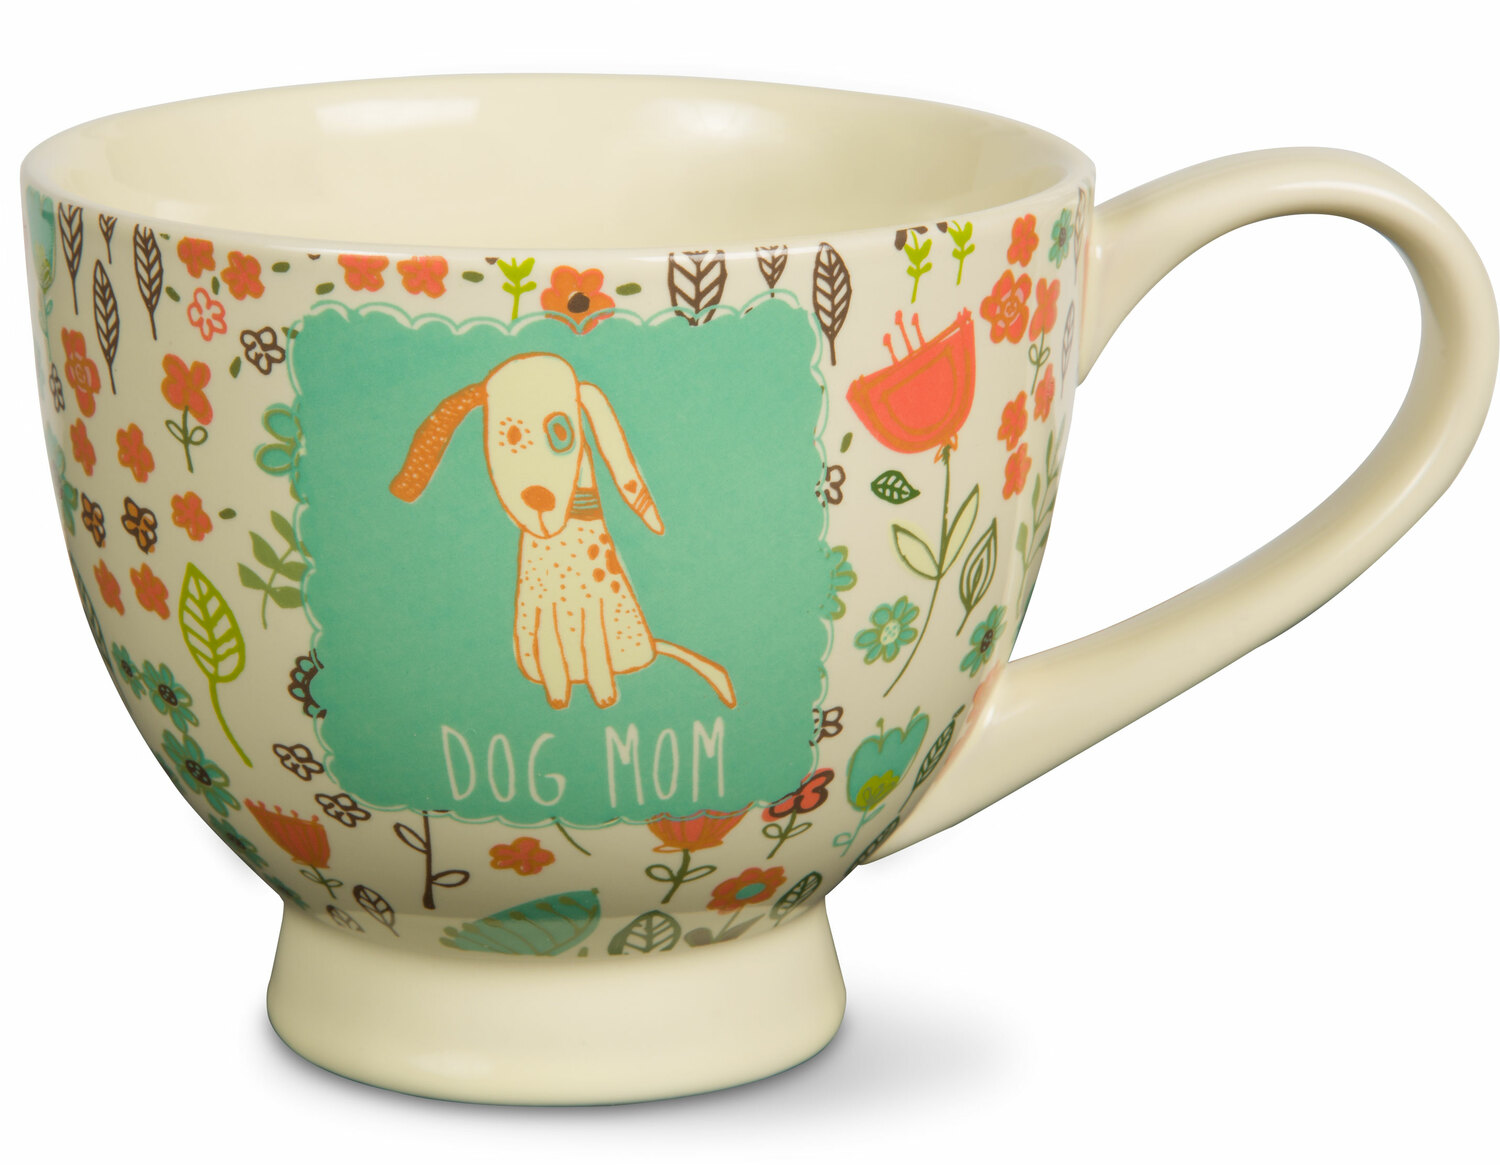 Dog Mom by A Mother's Love by Amylee Weeks - Dog Mom - 17 oz Cup